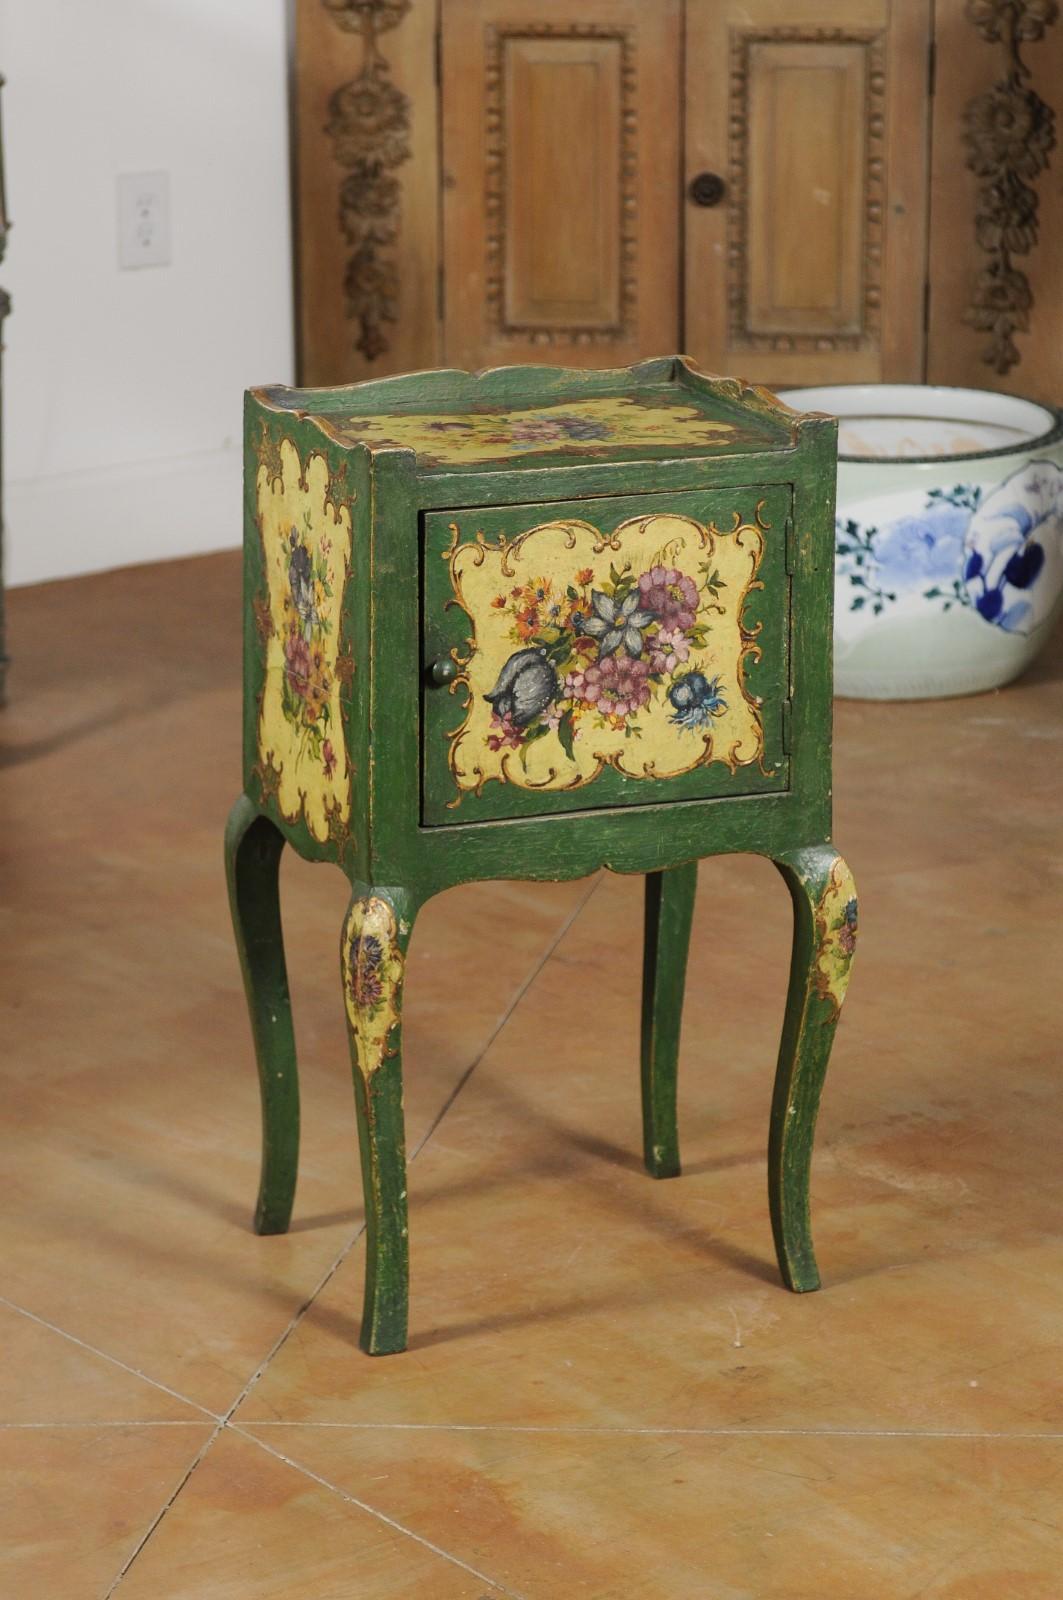 A Venetian Rococo style wood bedside table from the 19th century, with painted floral décor, single door and cabriole legs. Born in the Serenissima during the 19th century, this small bedside table features a rectangular top surrounded by a